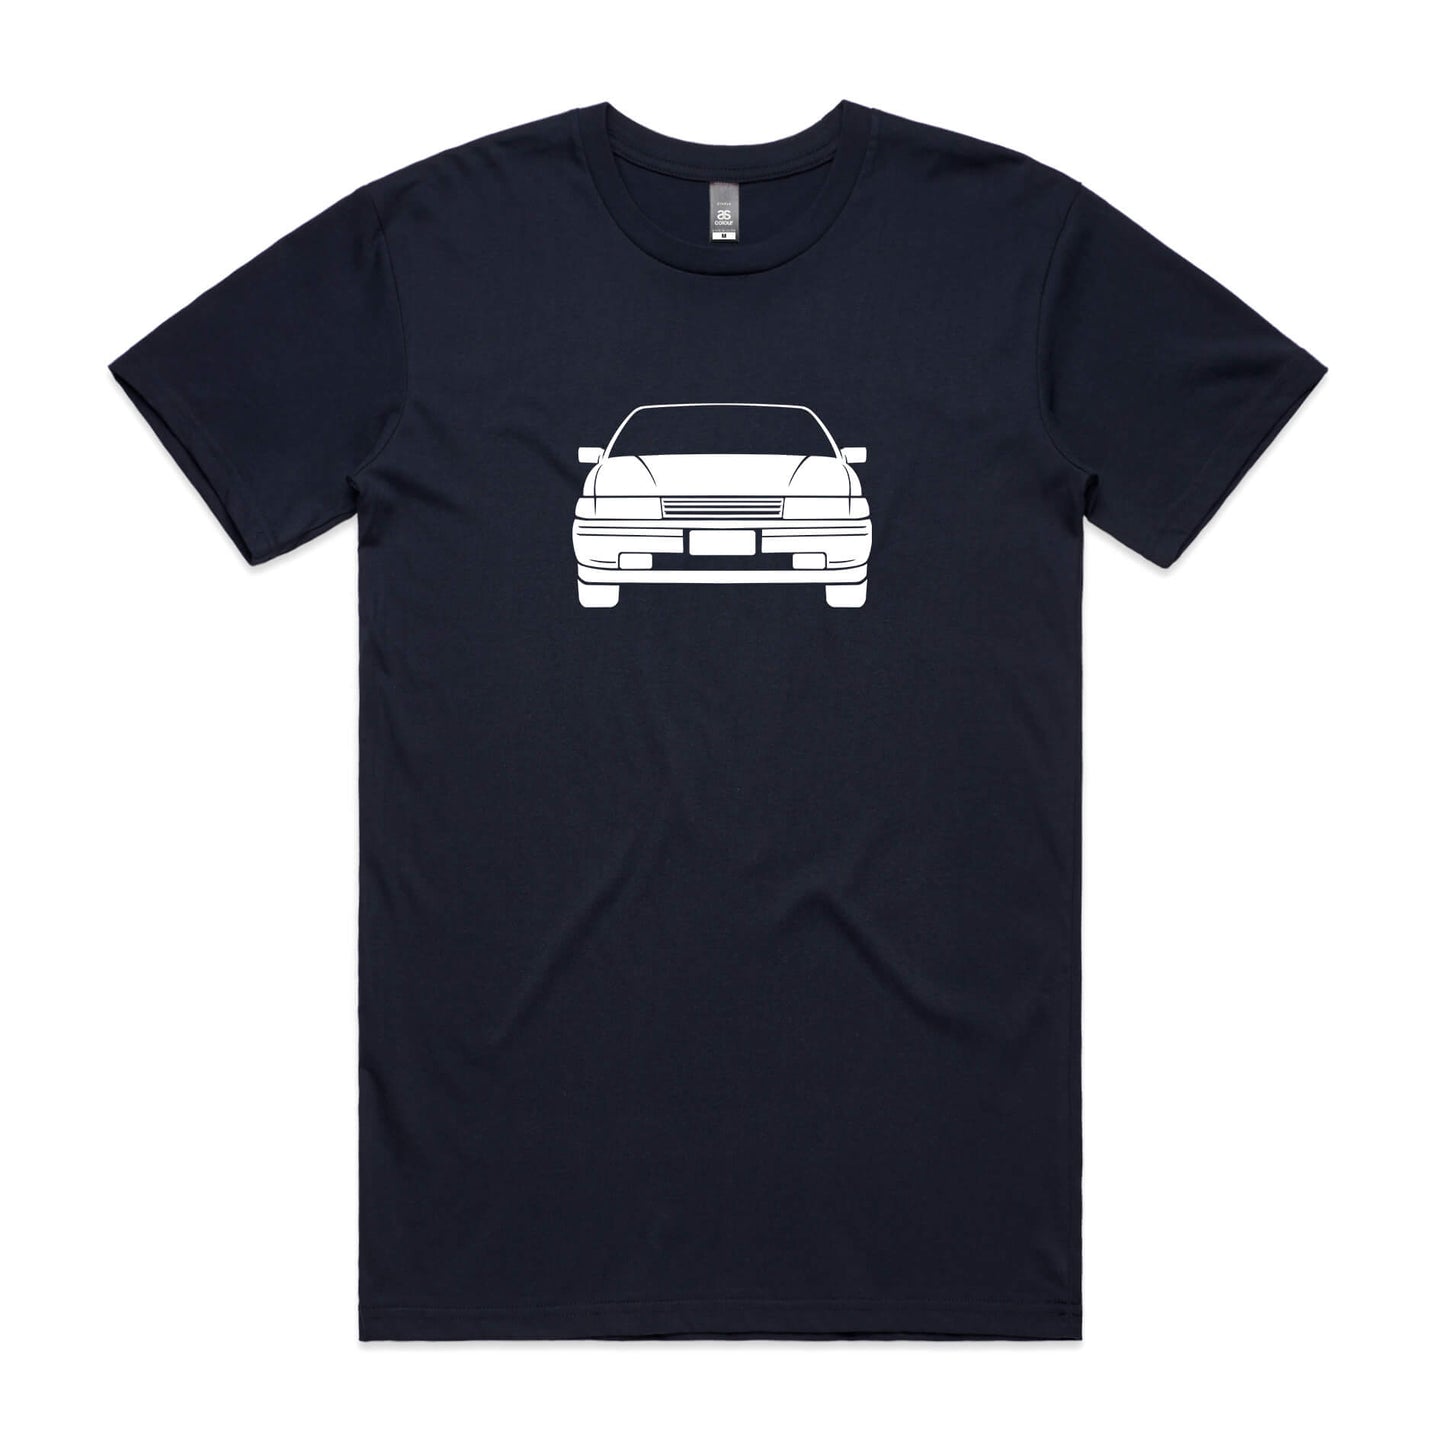 Holden VN Commodore t-shirt in navy blue